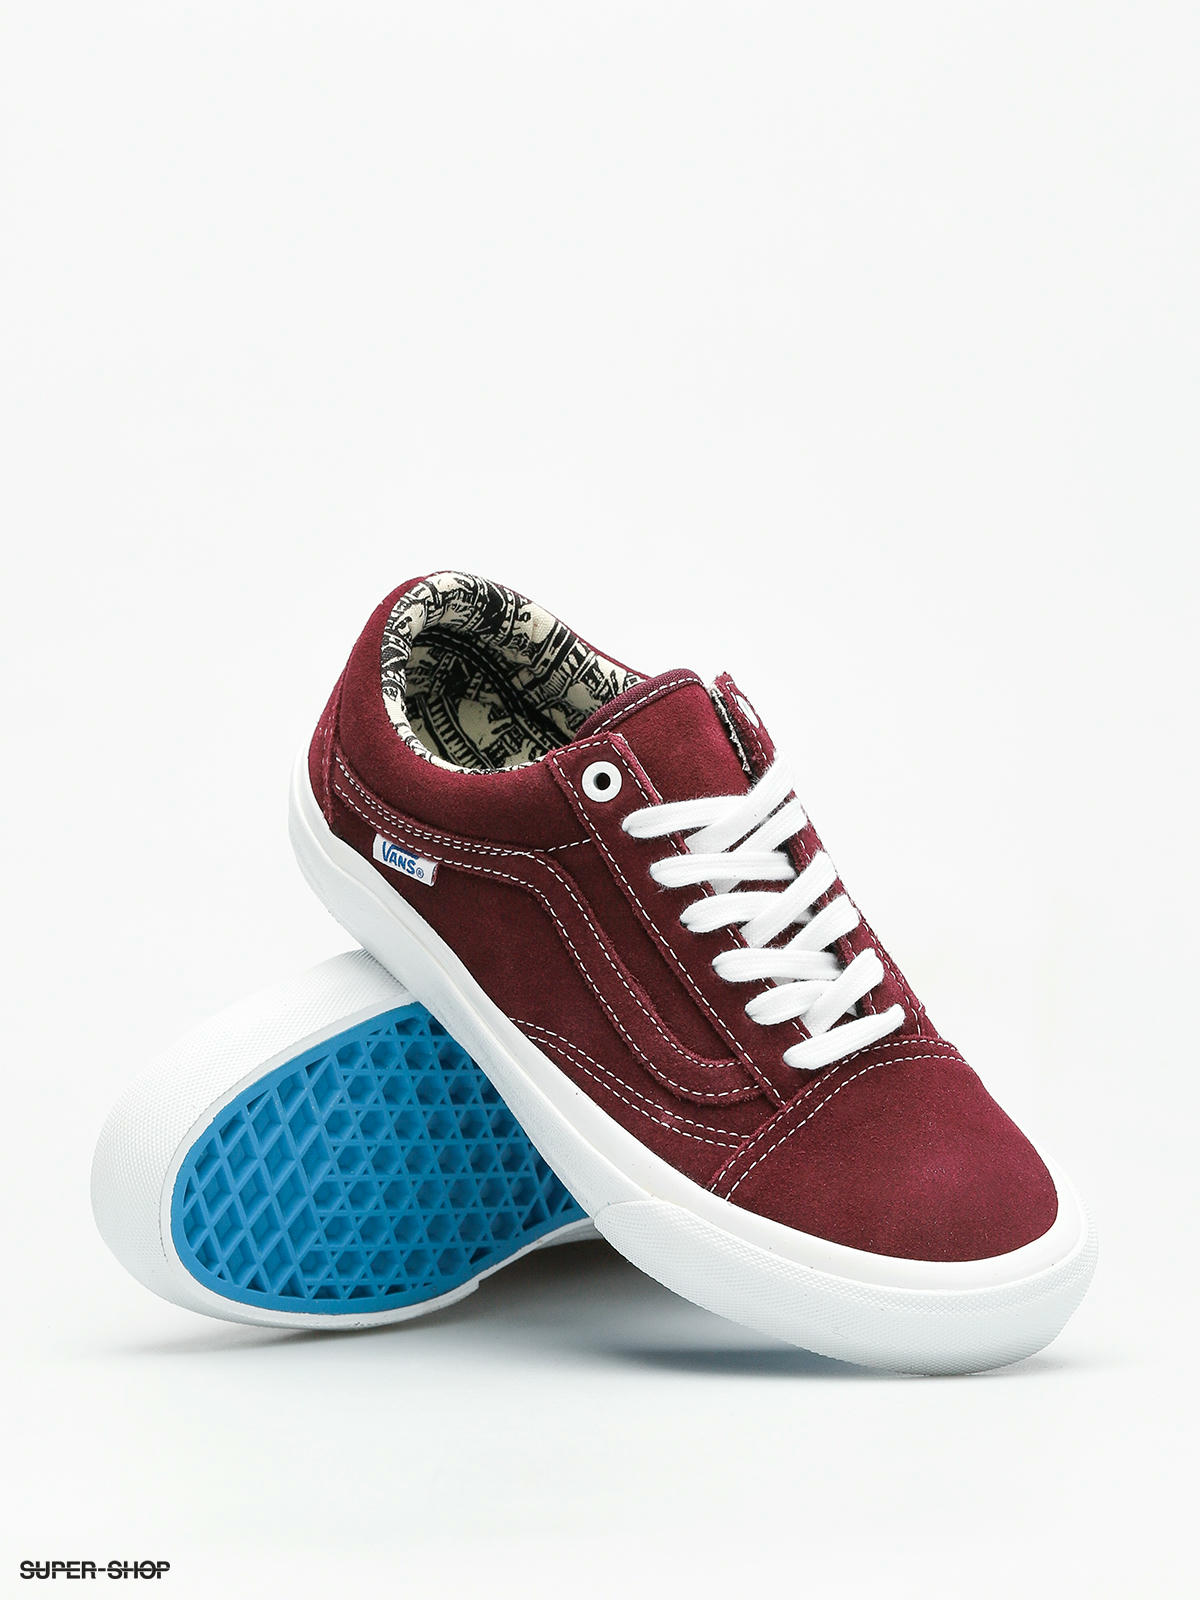 ray barbee old skool pro shoes